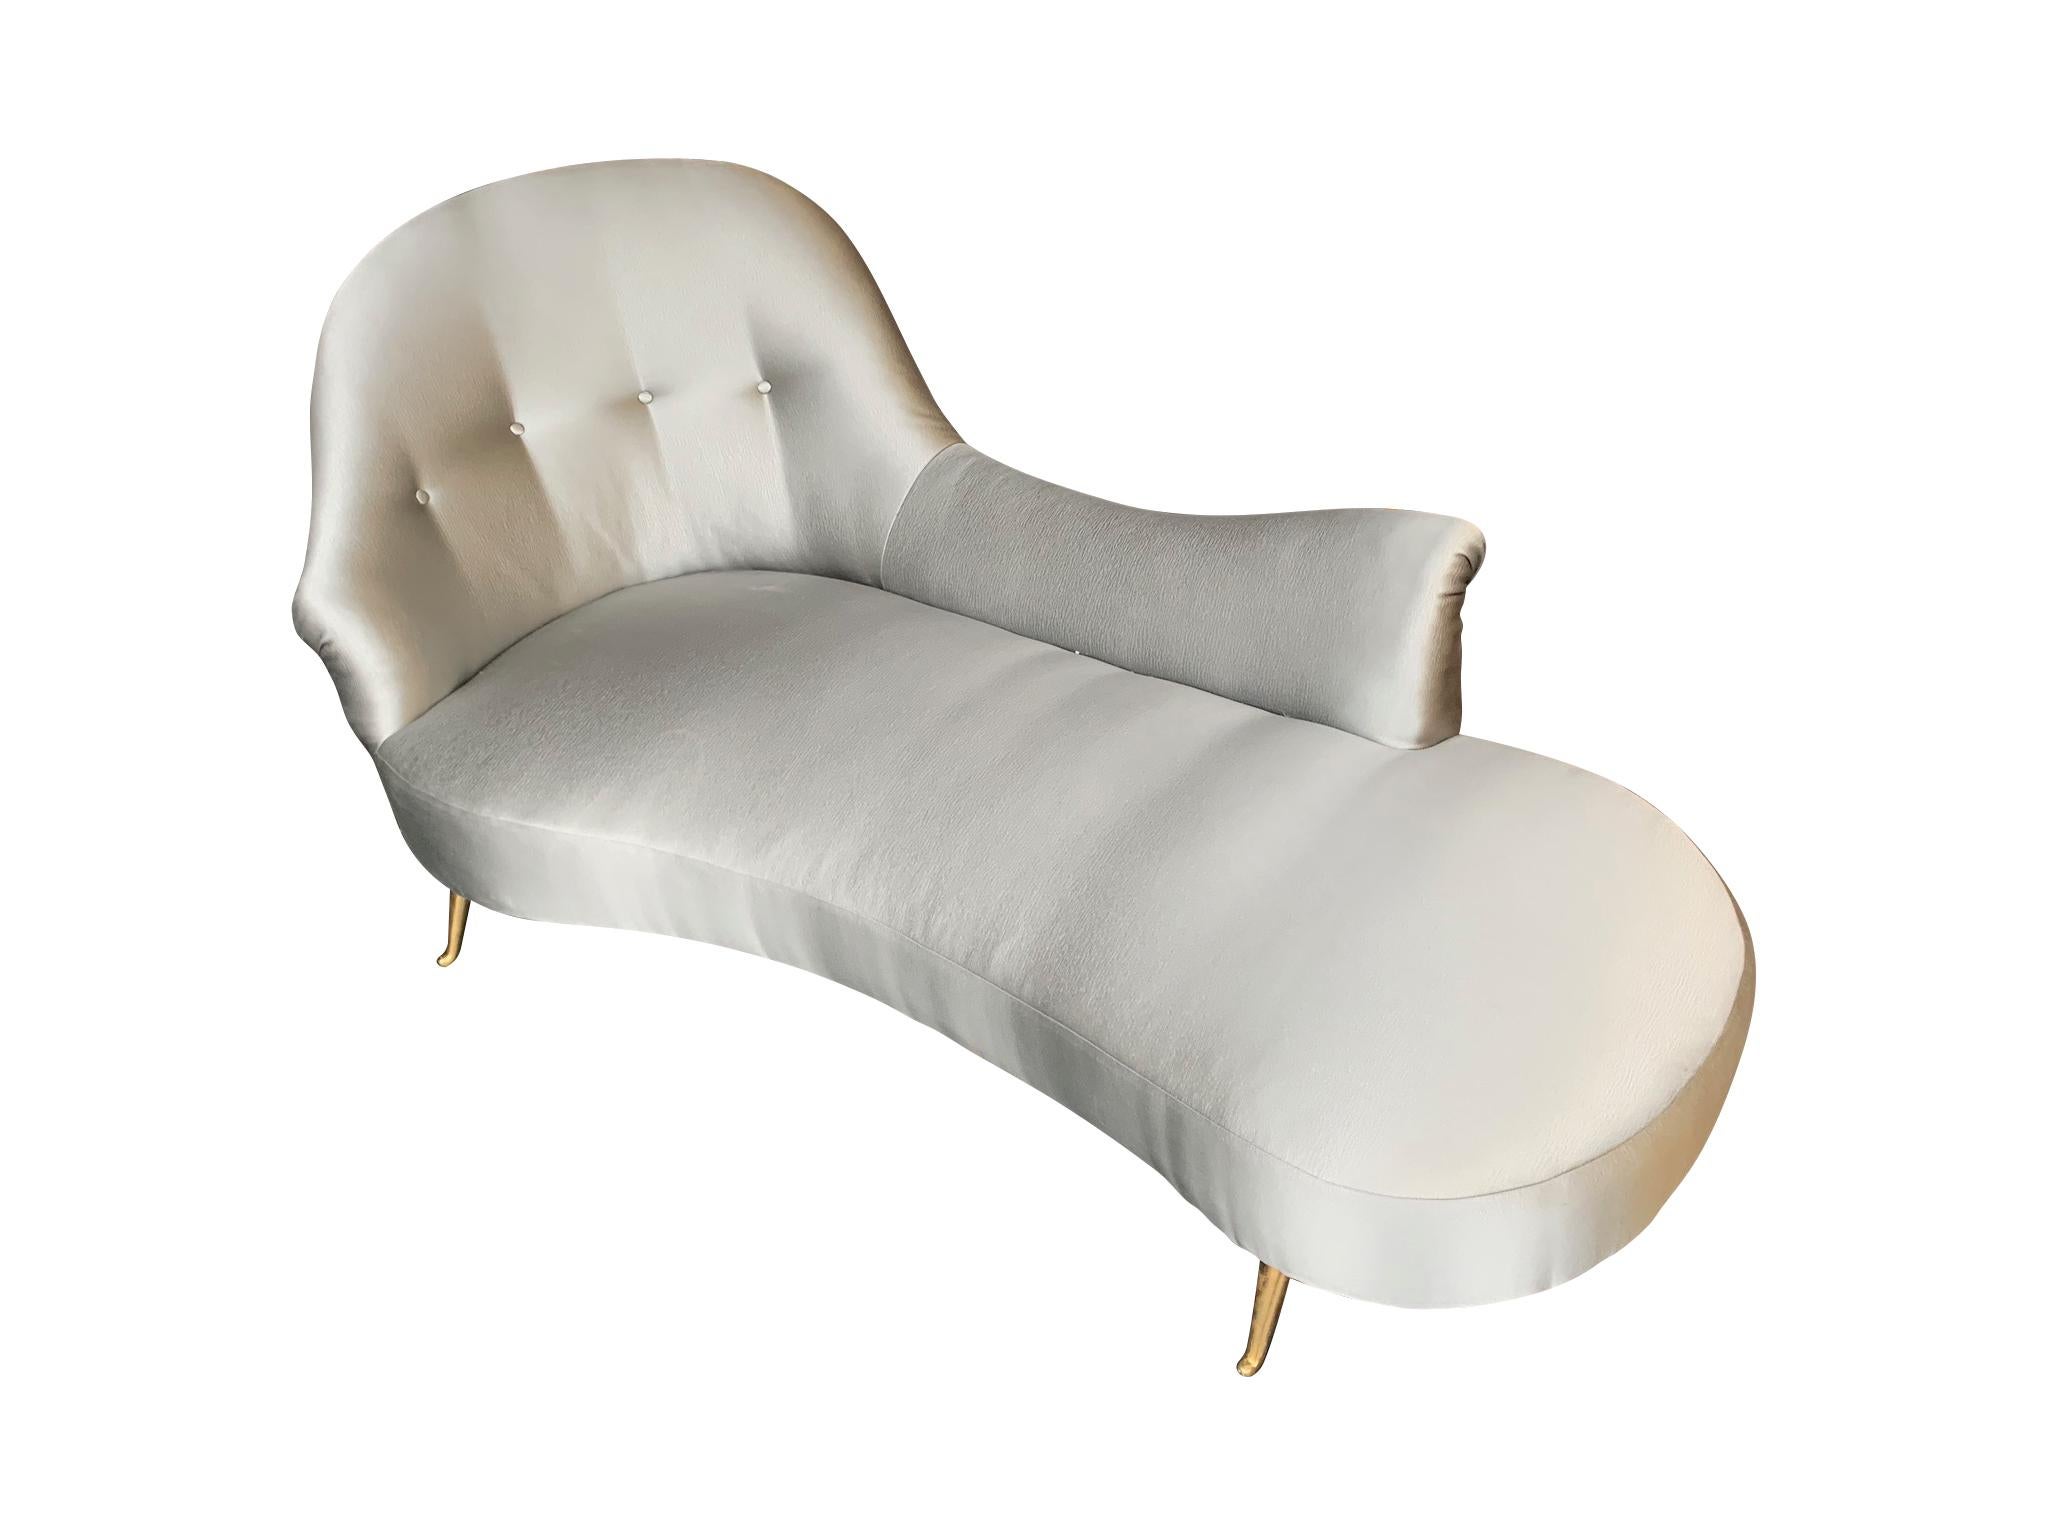 Mid-Century Modern Italian Chaise Longue Upholstered in Silver Grey Fabric with Brass Feet